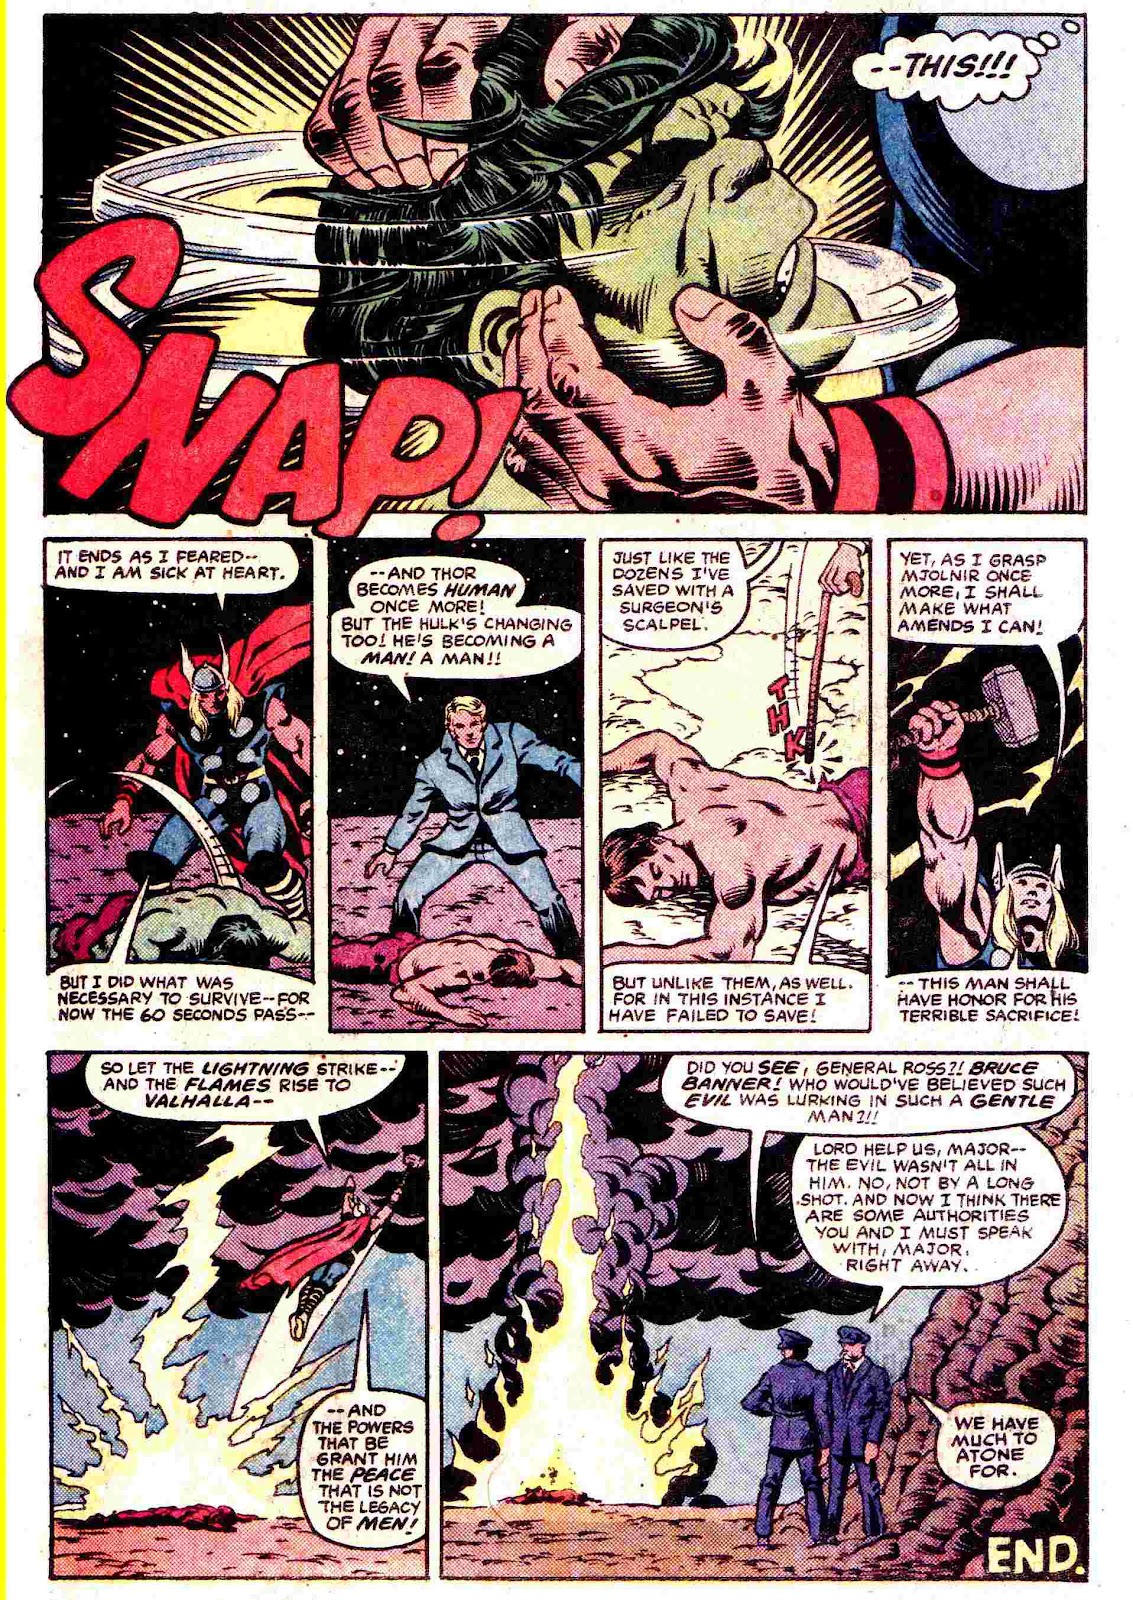 What If? (1977) issue 45 - The Hulk went Berserk - Page 41